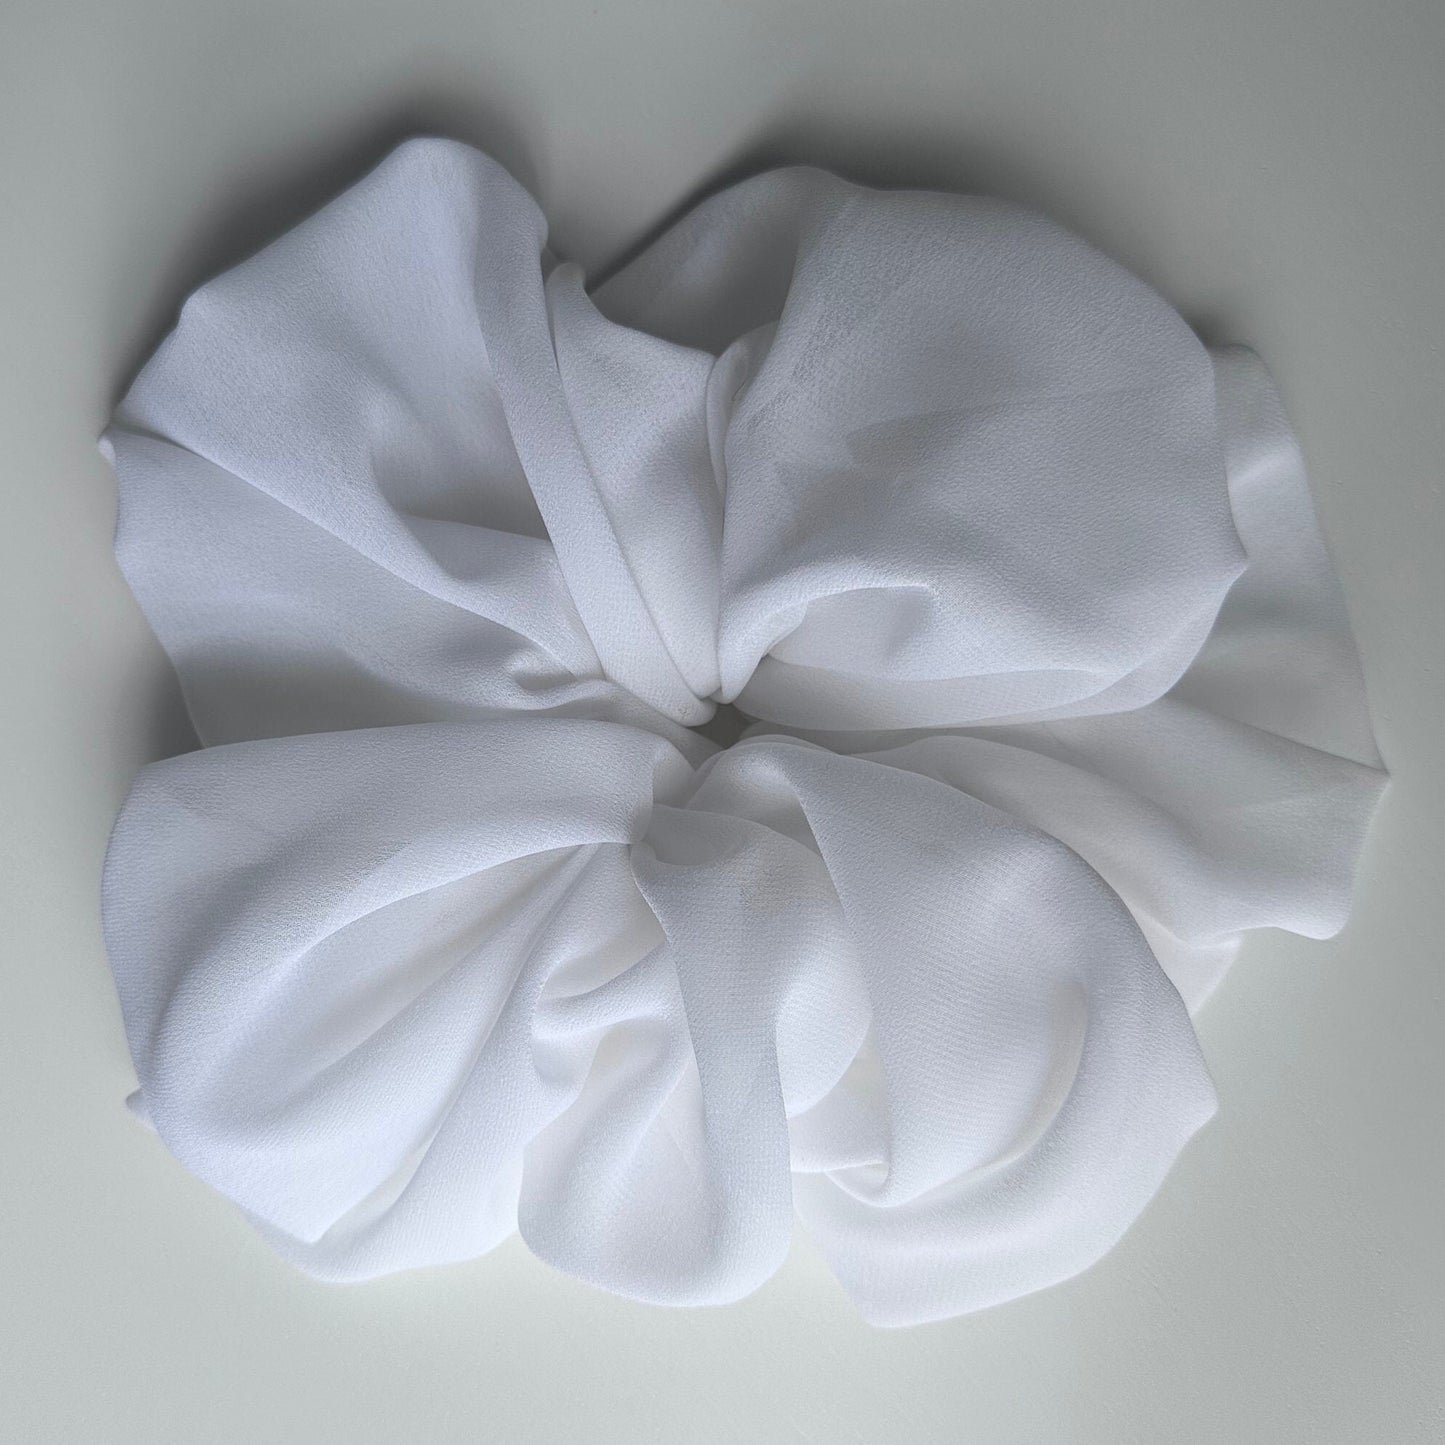 Chiffon Scrunchie to Glam Up Your Hair